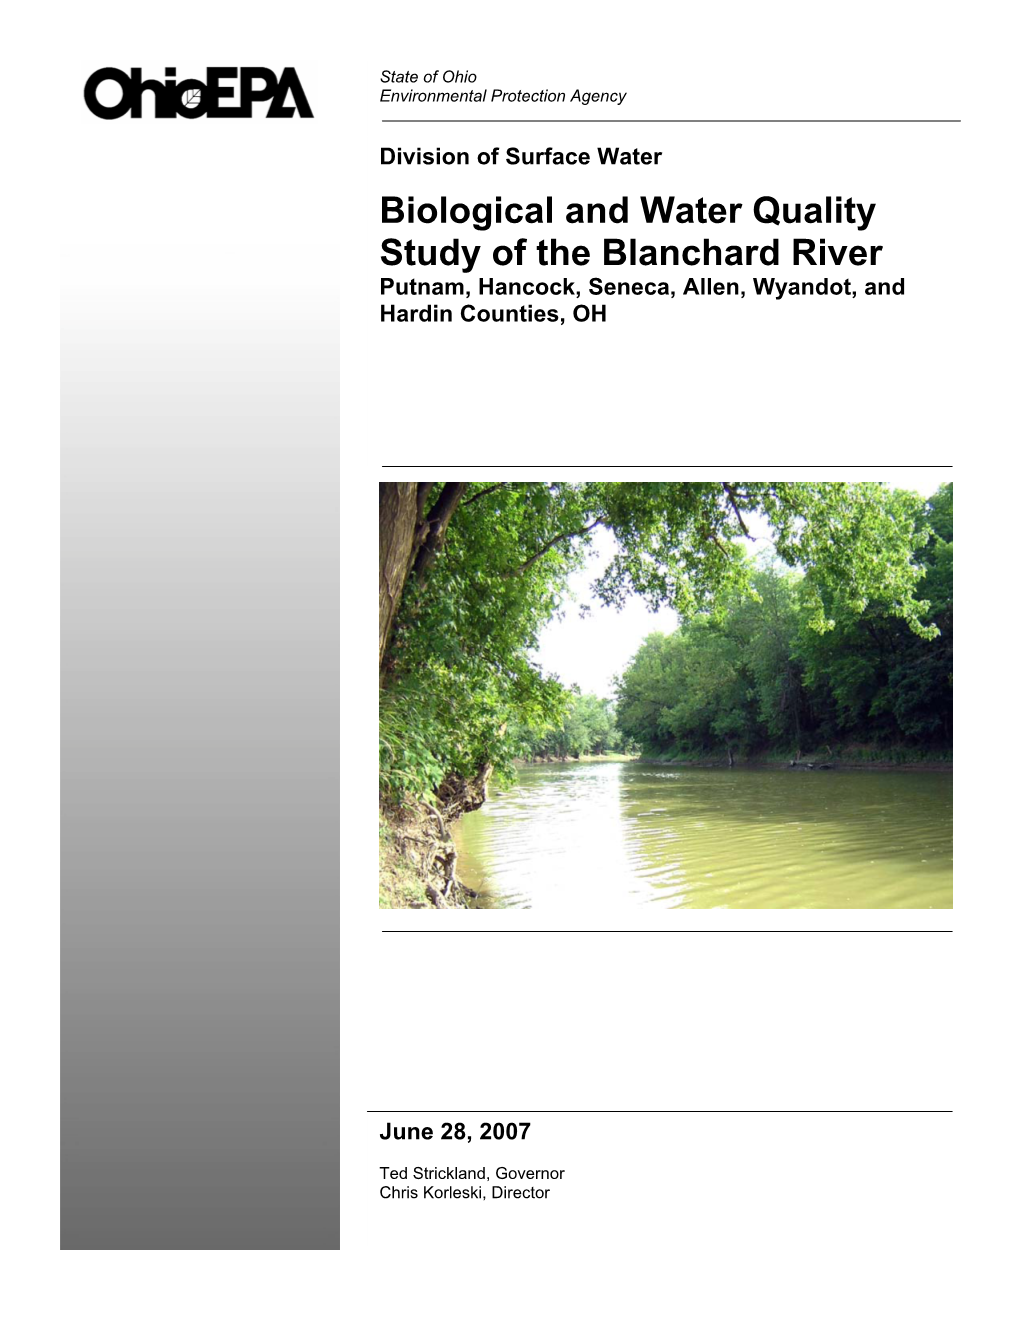 Biological and Water Quality Study of the Blanchard River Putnam, Hancock, Seneca, Allen, Wyandot, and Hardin Counties, OH